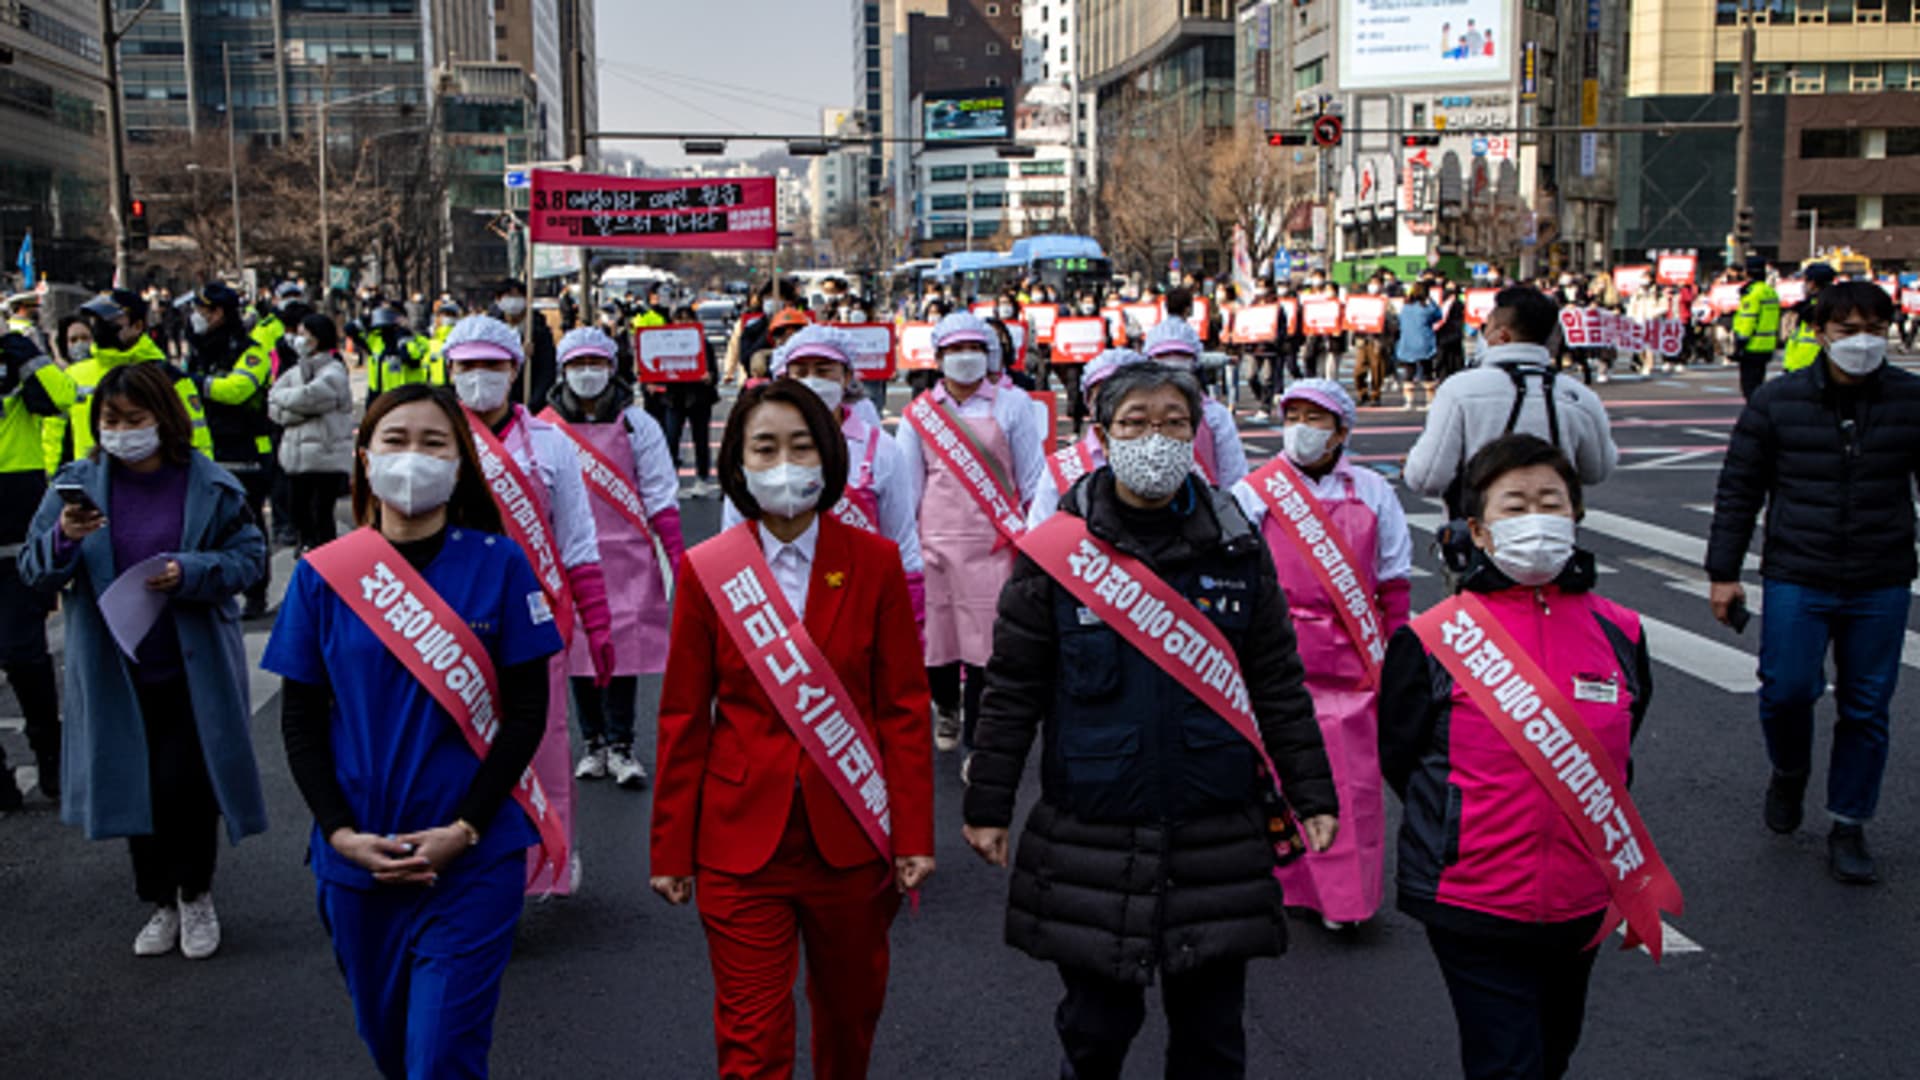 Women make up 20% of Asia's boardrooms; South Korea, Japan lag further